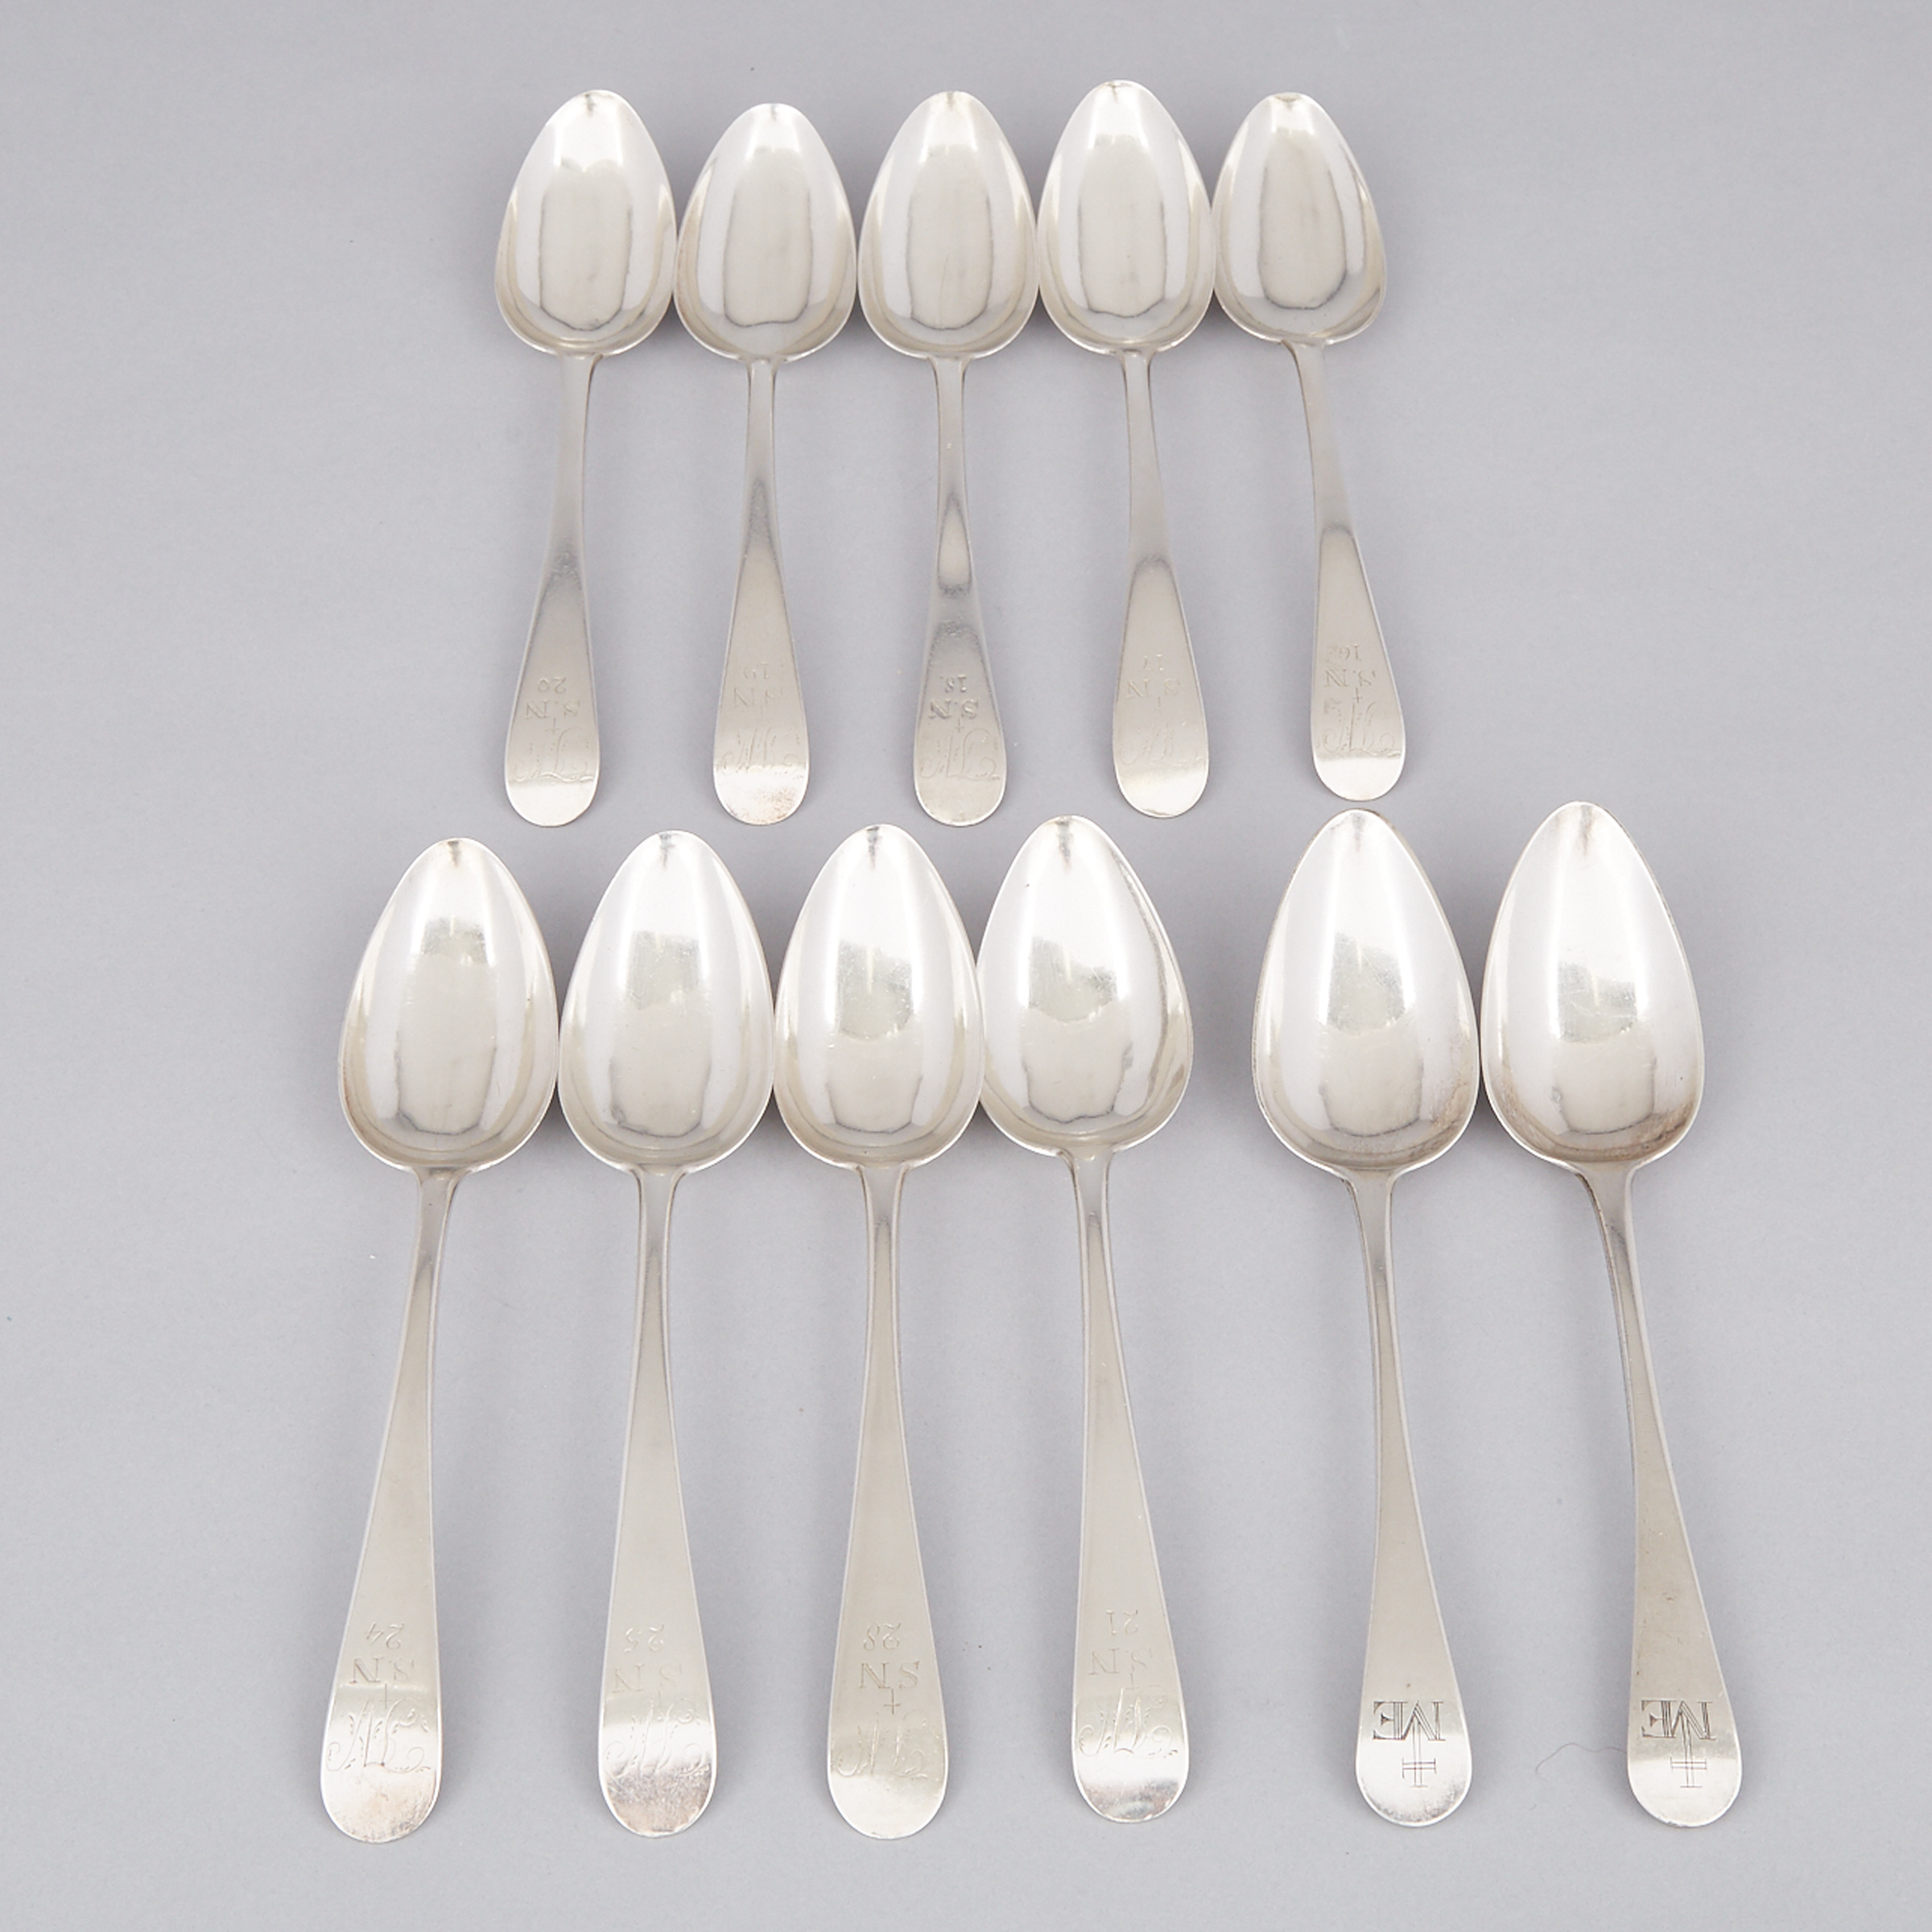 Eleven Canadian Silver Old English Pattern Table Spoons, Laurent Amiot, Quebec City, Que., c.1800